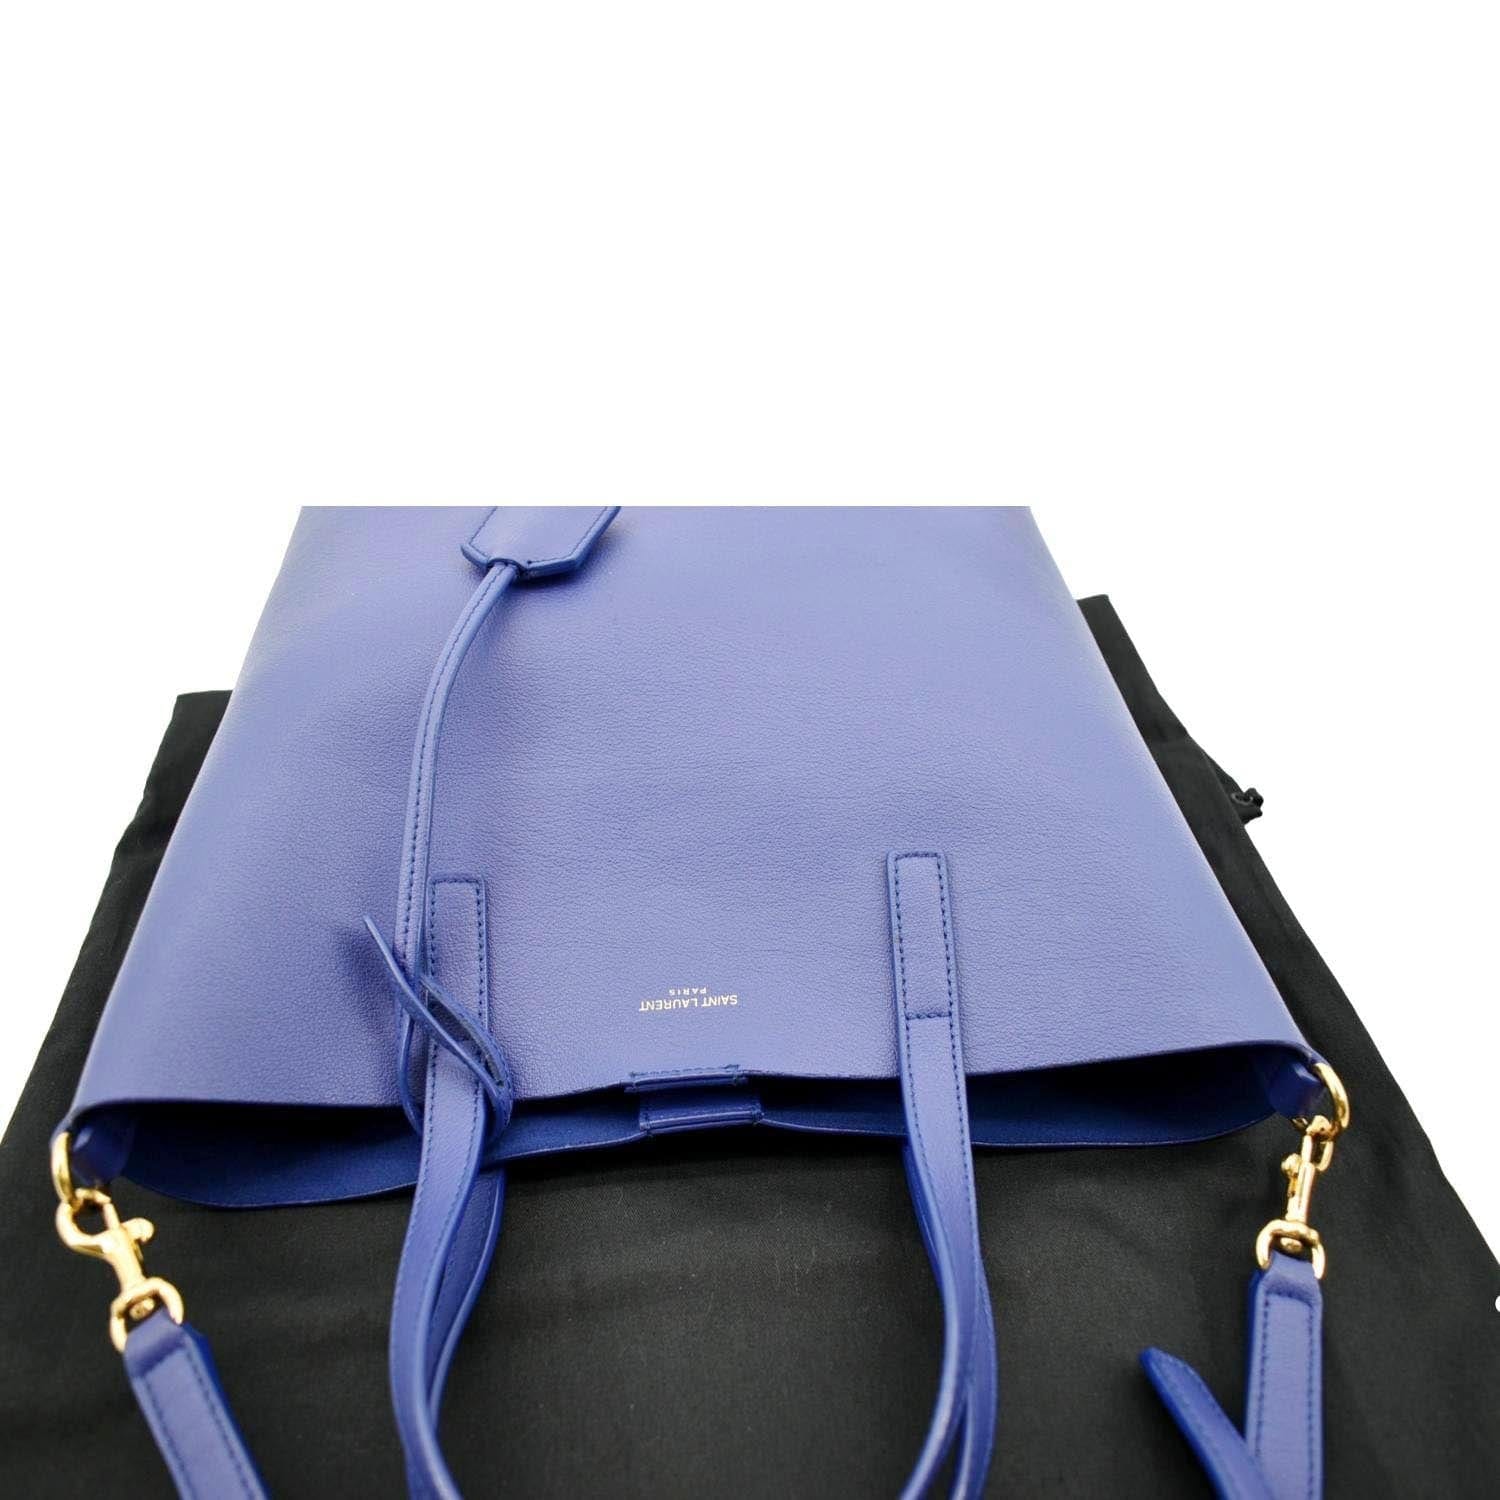 Saint Laurent Toy Leather Shopping Tote